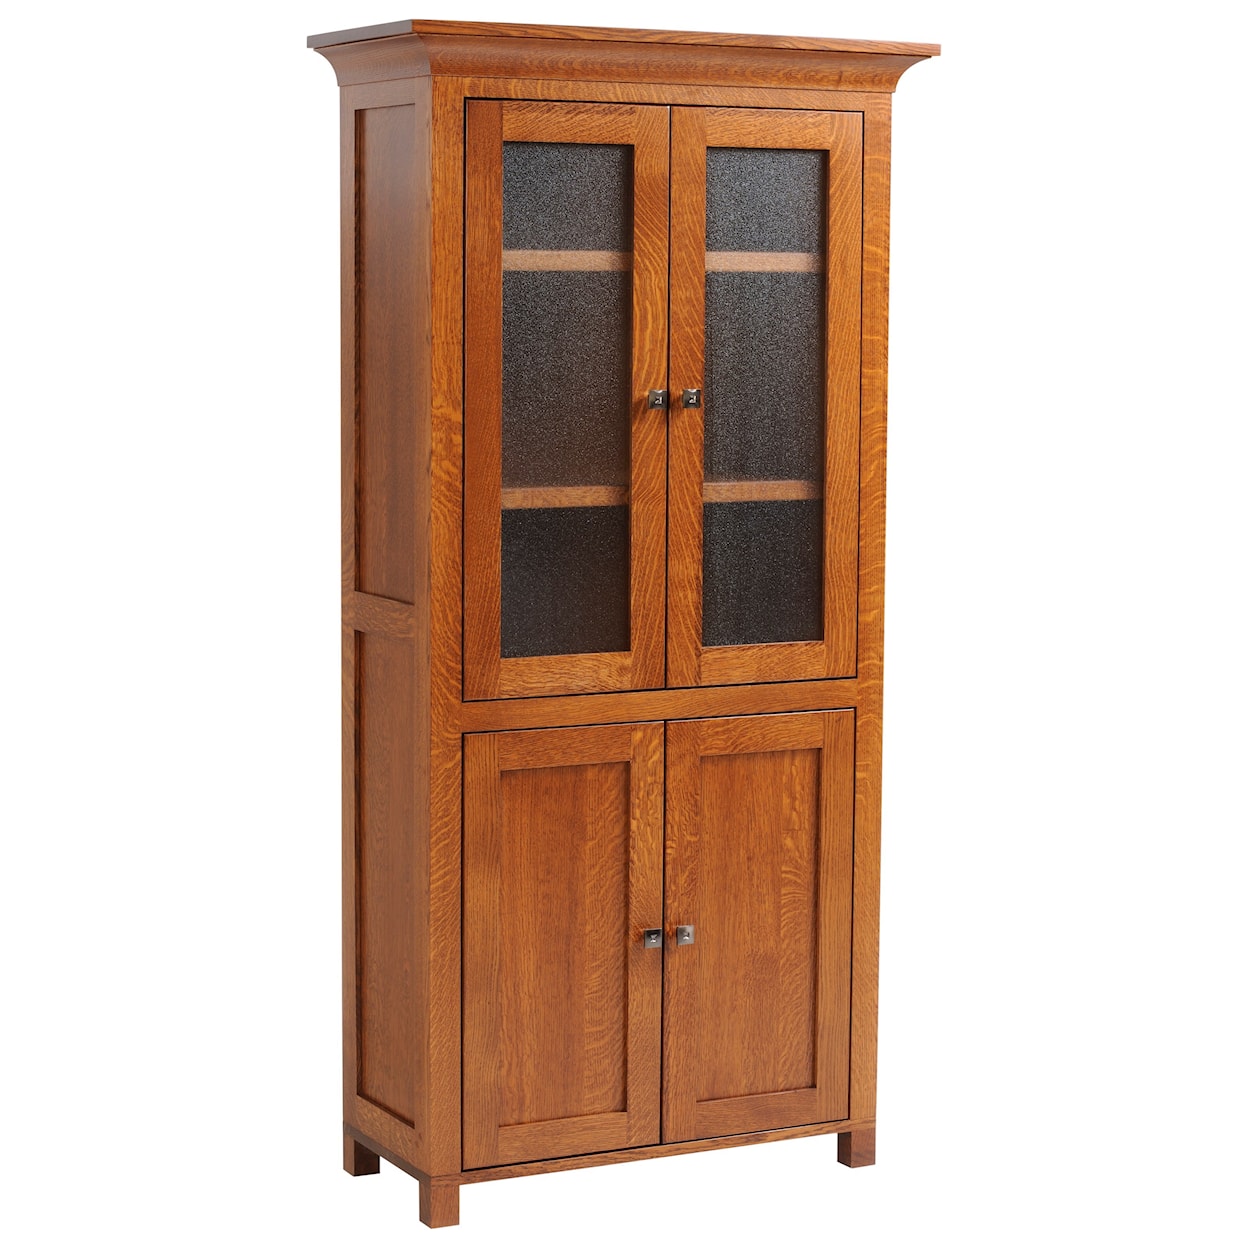 Y & T Woodcraft Coventry Mission Bookcase with Doors